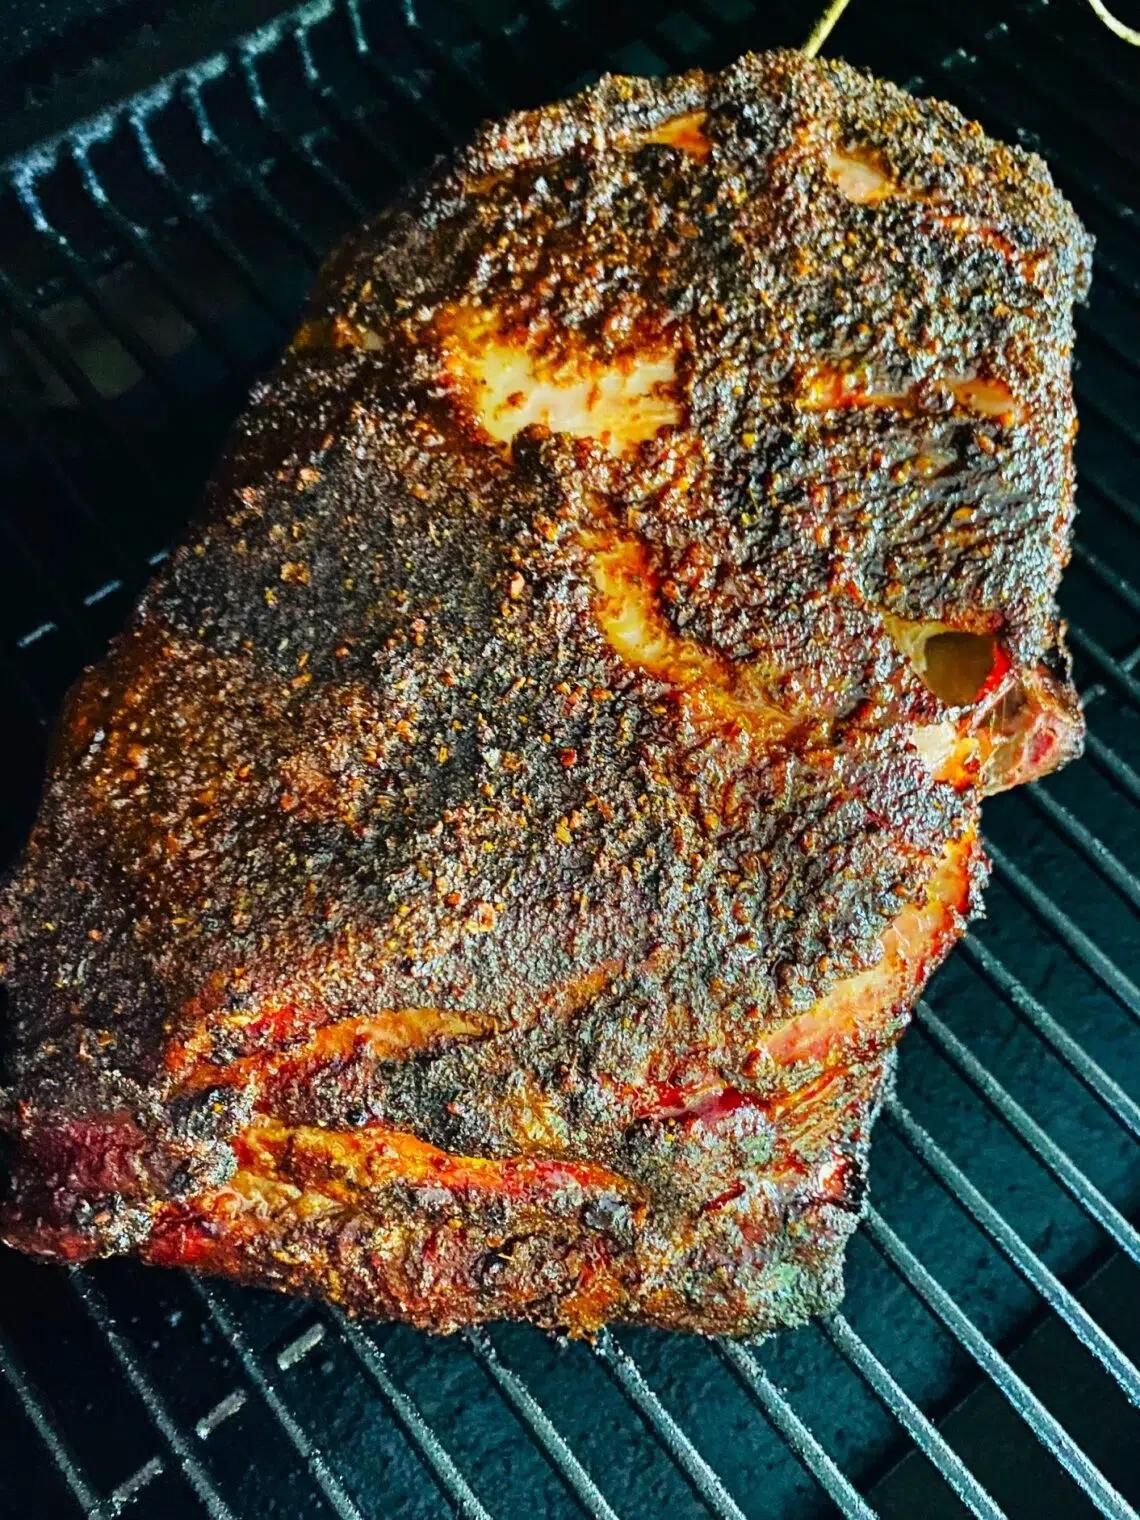 smoked pork shoulder traeger - How long does it take to smoke a pork shoulder at 300 degrees